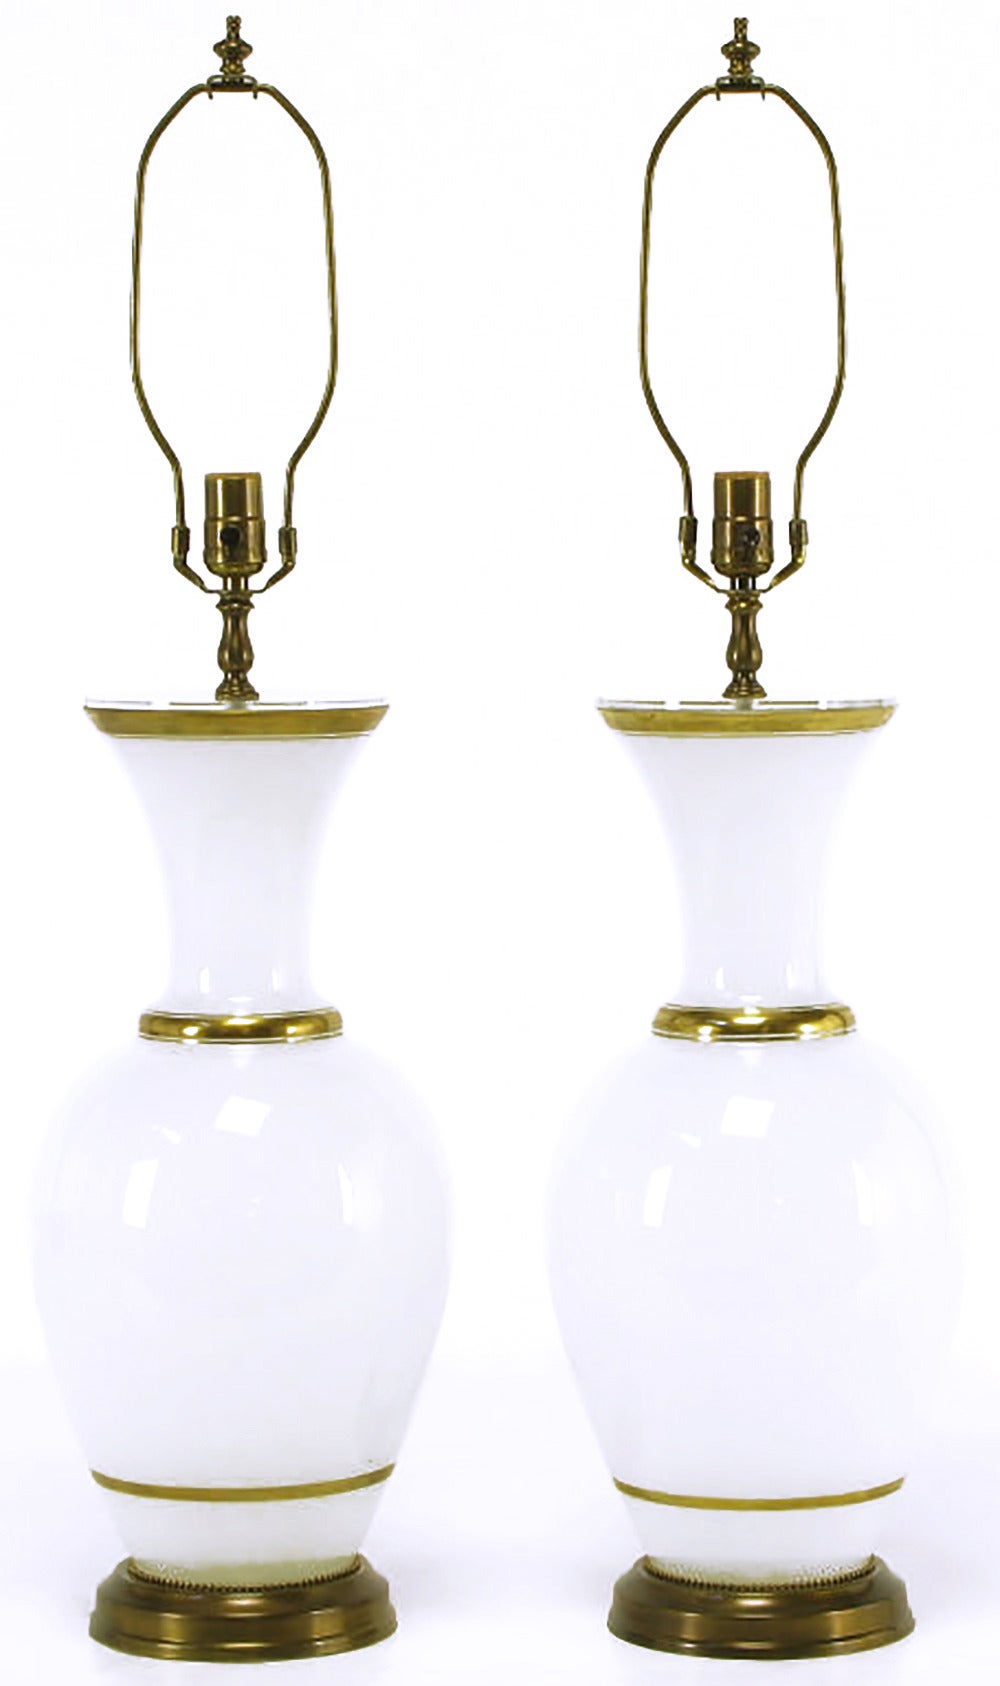 Pair of vase form milk glass table lamps with gilt banding and brass bases. Unexpected Lucite vase cap fitted to the top of the lamp bodies. Brass stem, harp and socket.